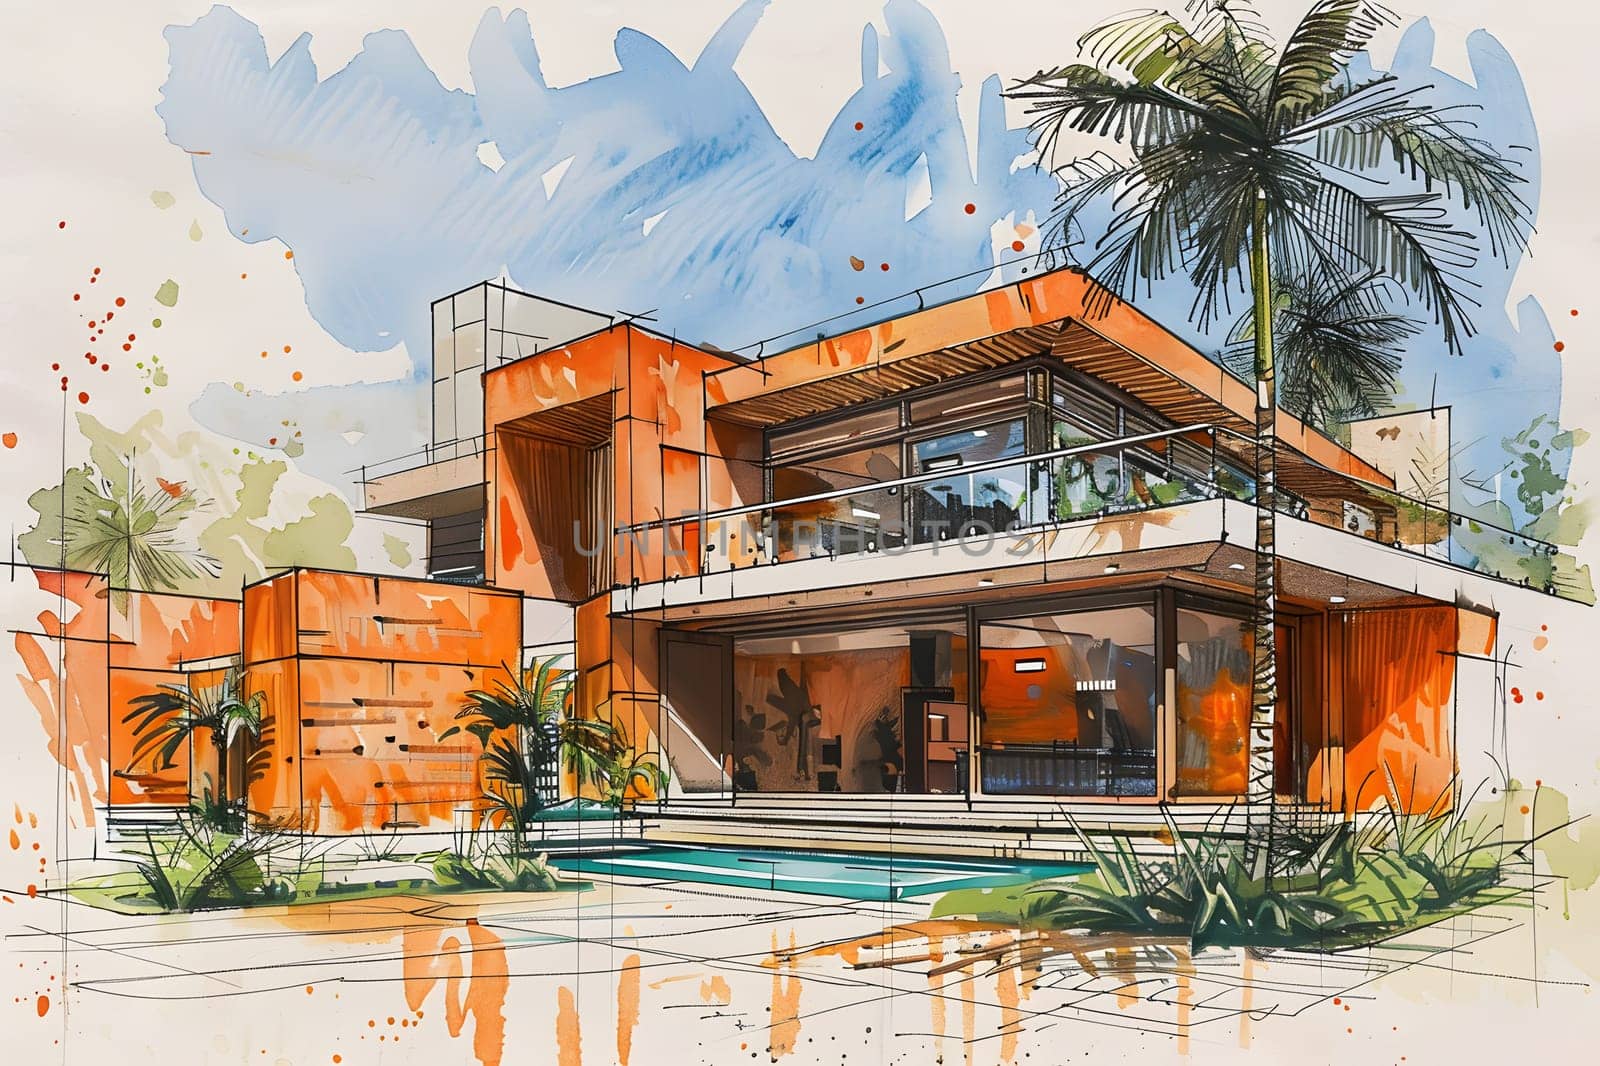 A vibrant watercolor painting of a contemporary house featuring a pool and palm trees, under a colorful sky with fluffy clouds, creating a serene natural landscape